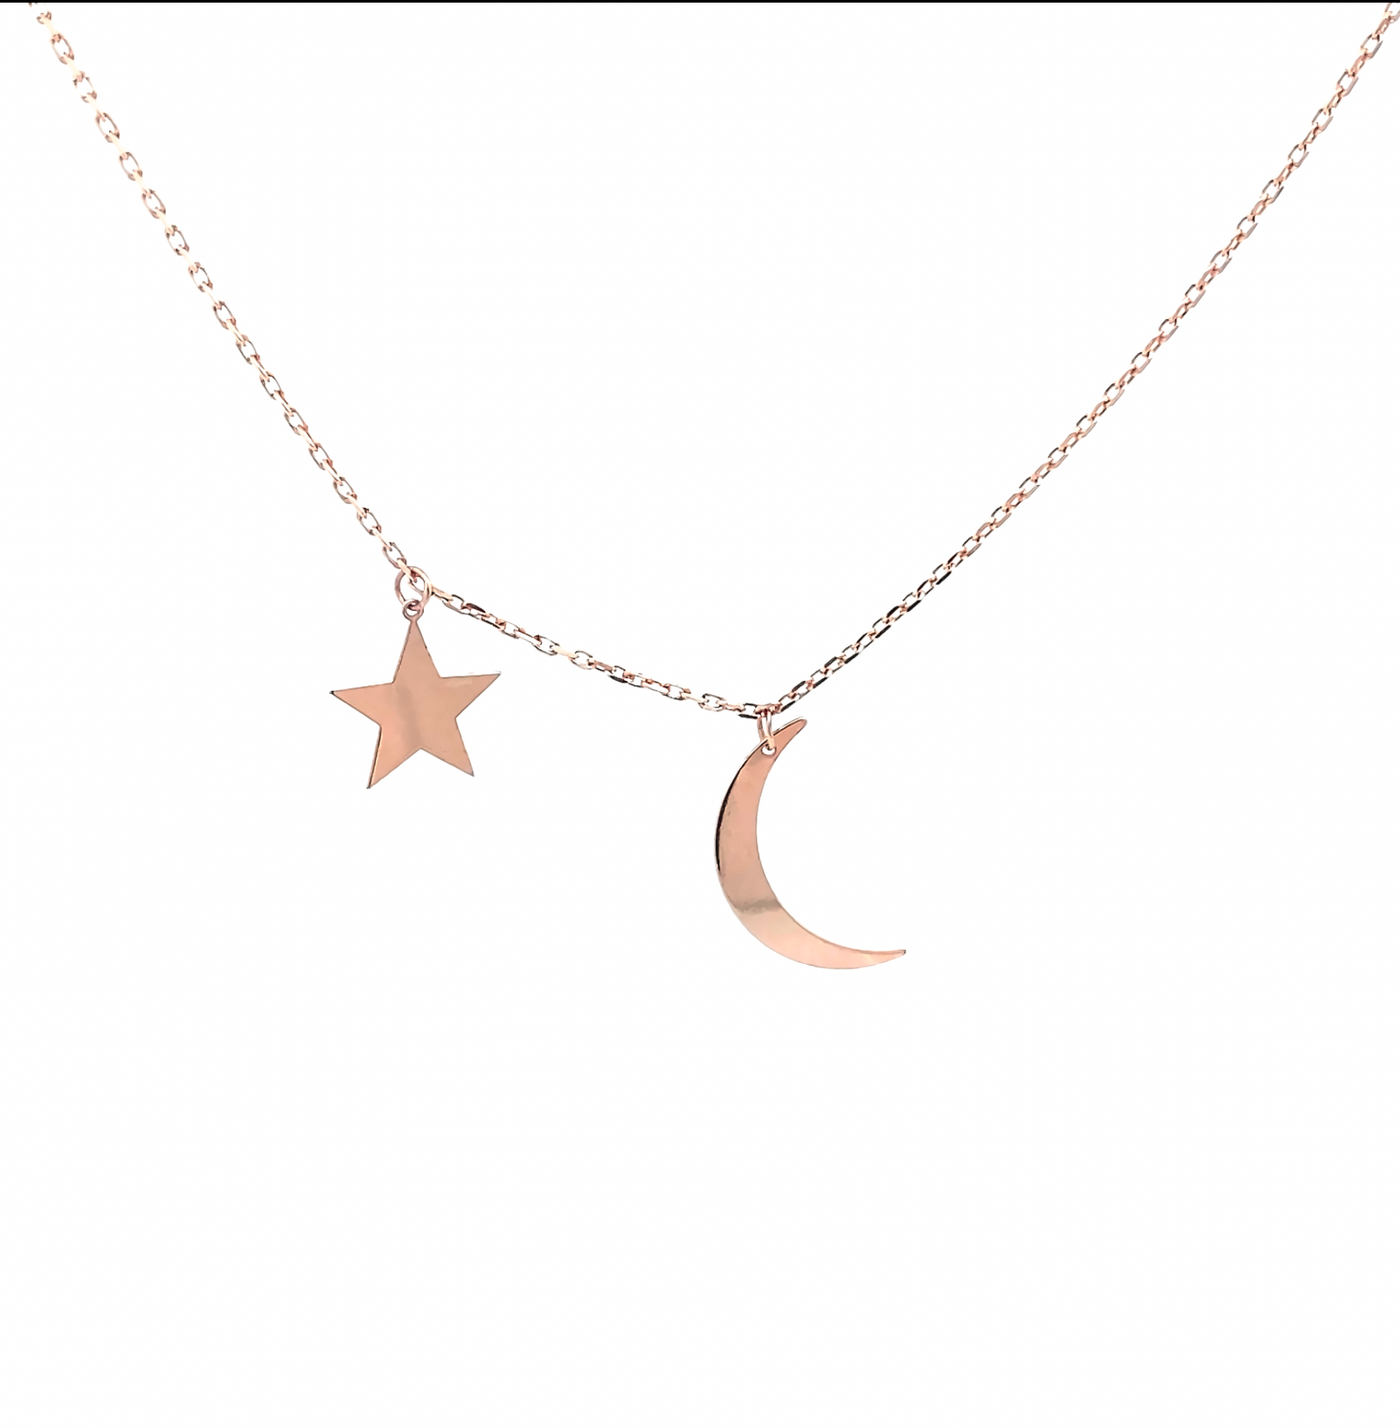 10 Karat Rose Gold Crescent Moon and Star Necklace